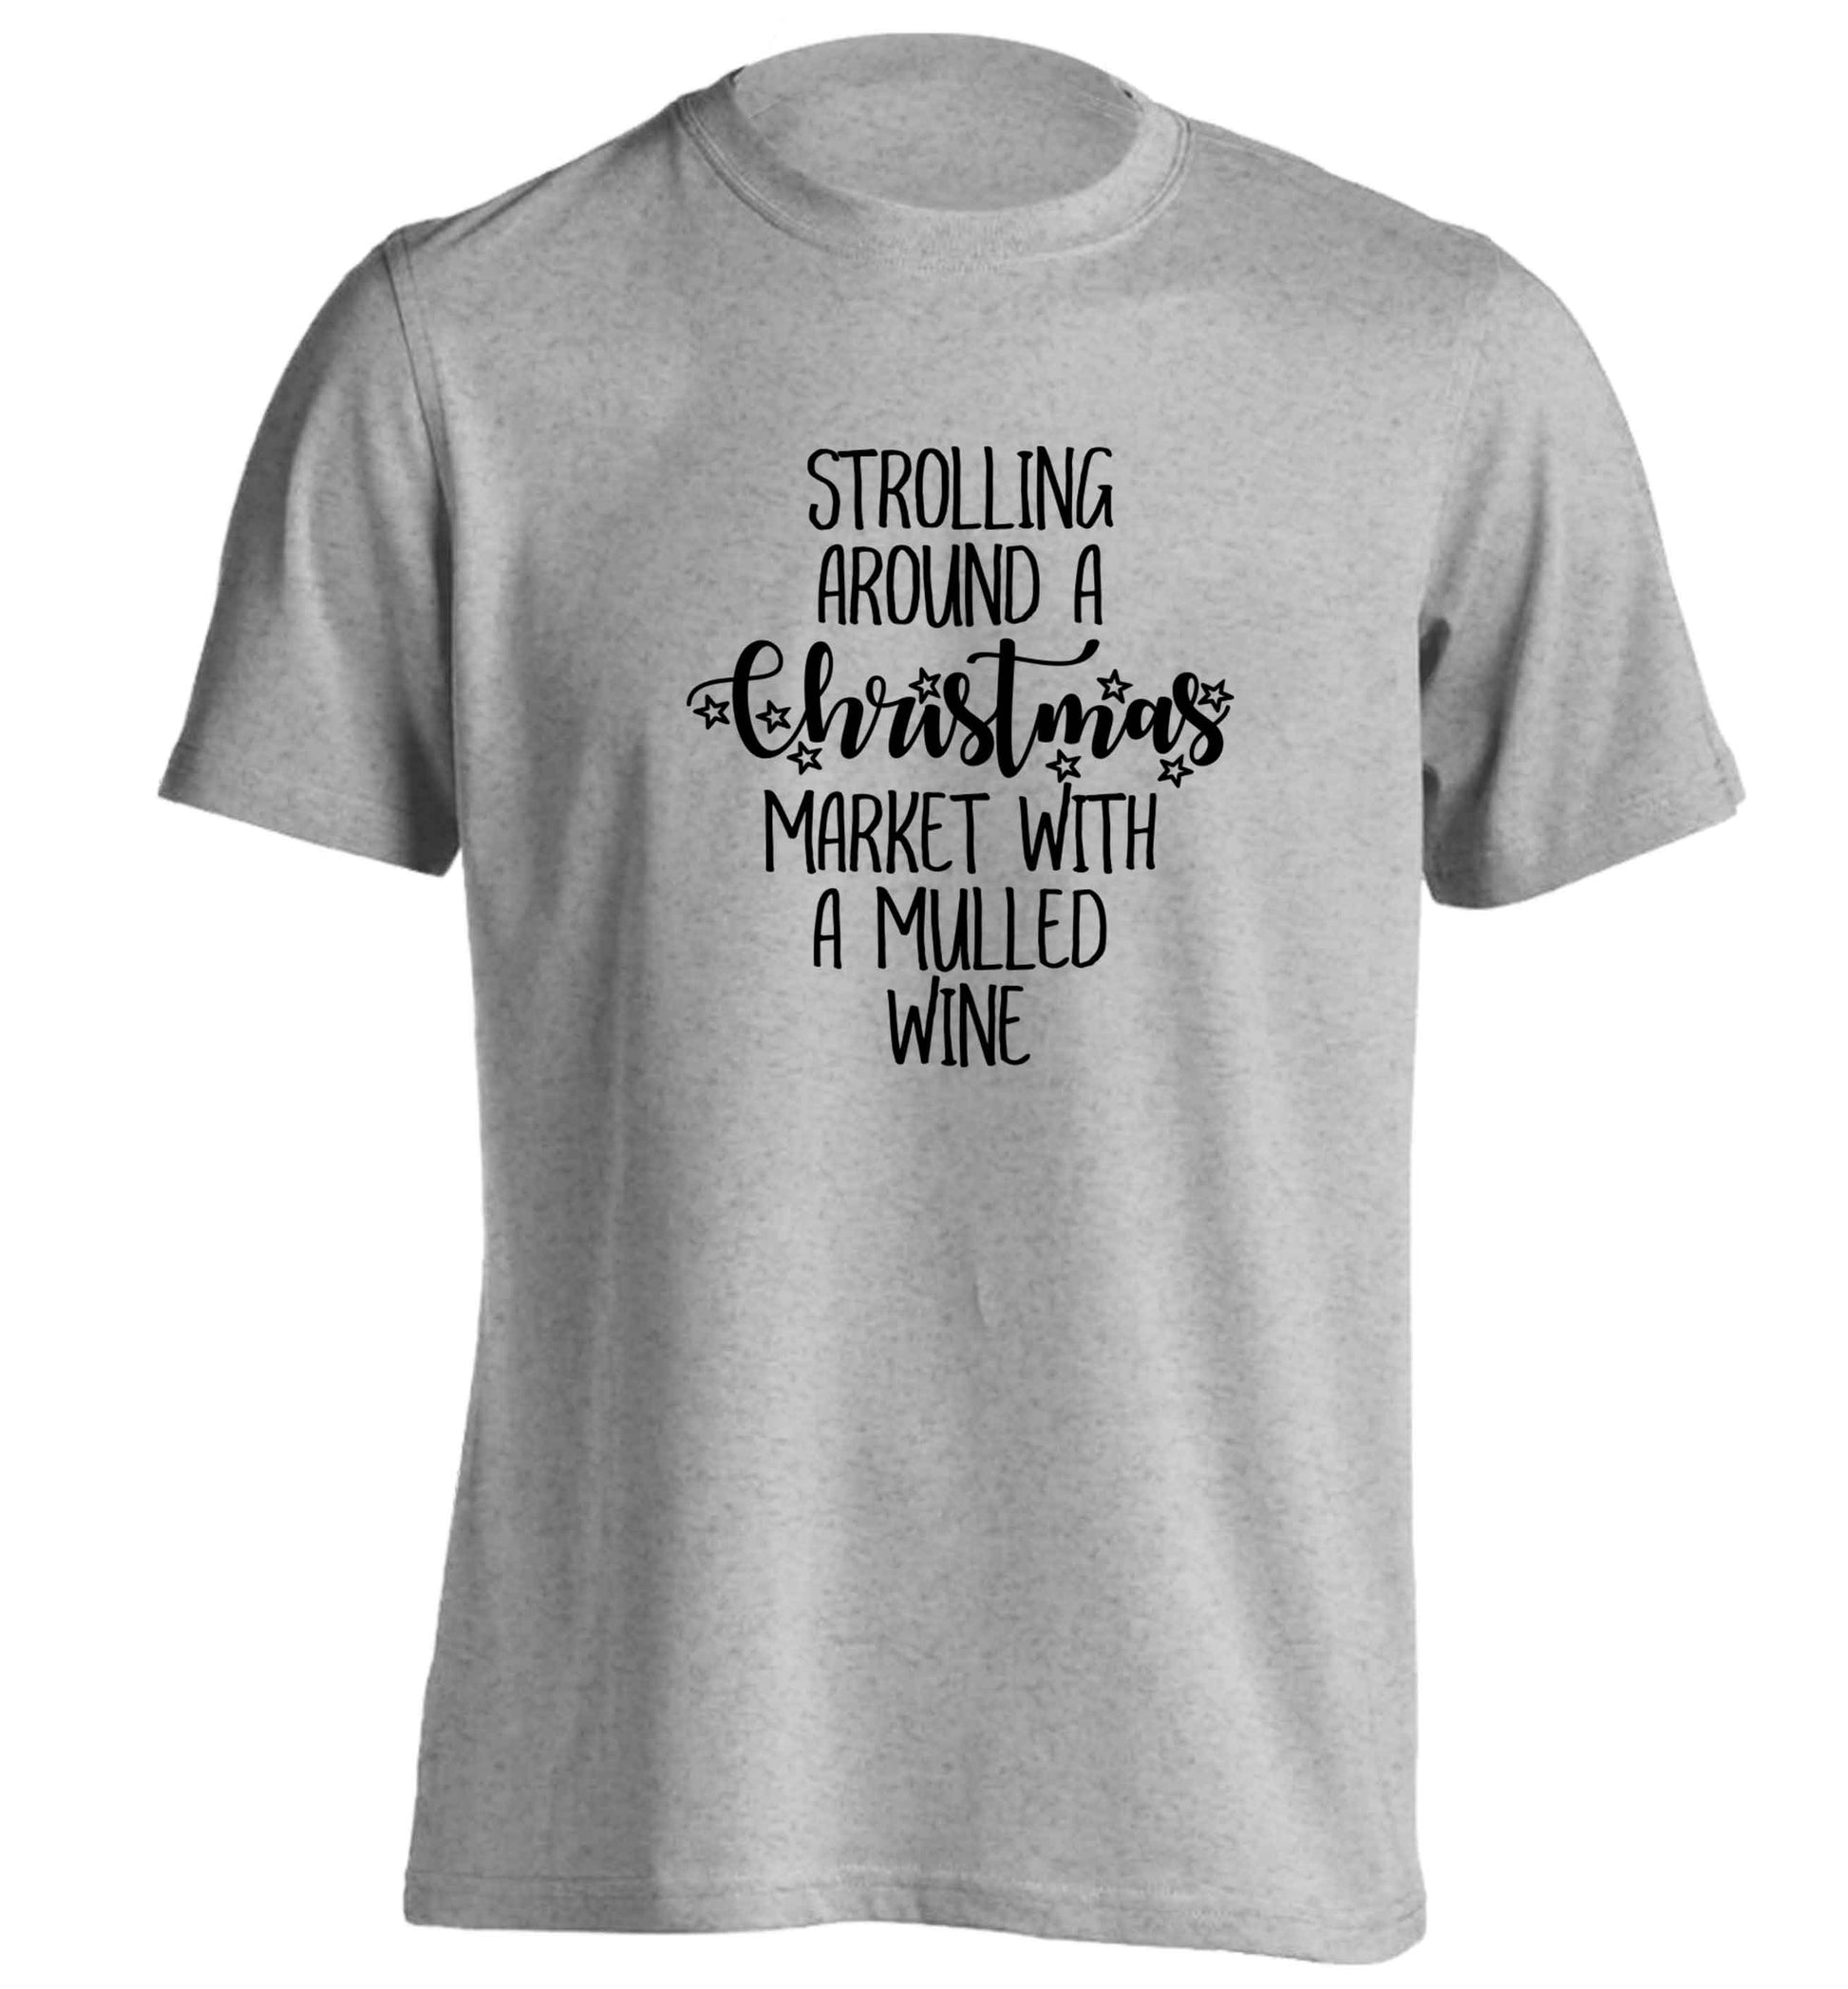 Strolling around a Christmas market with mulled wine adults unisex grey Tshirt 2XL